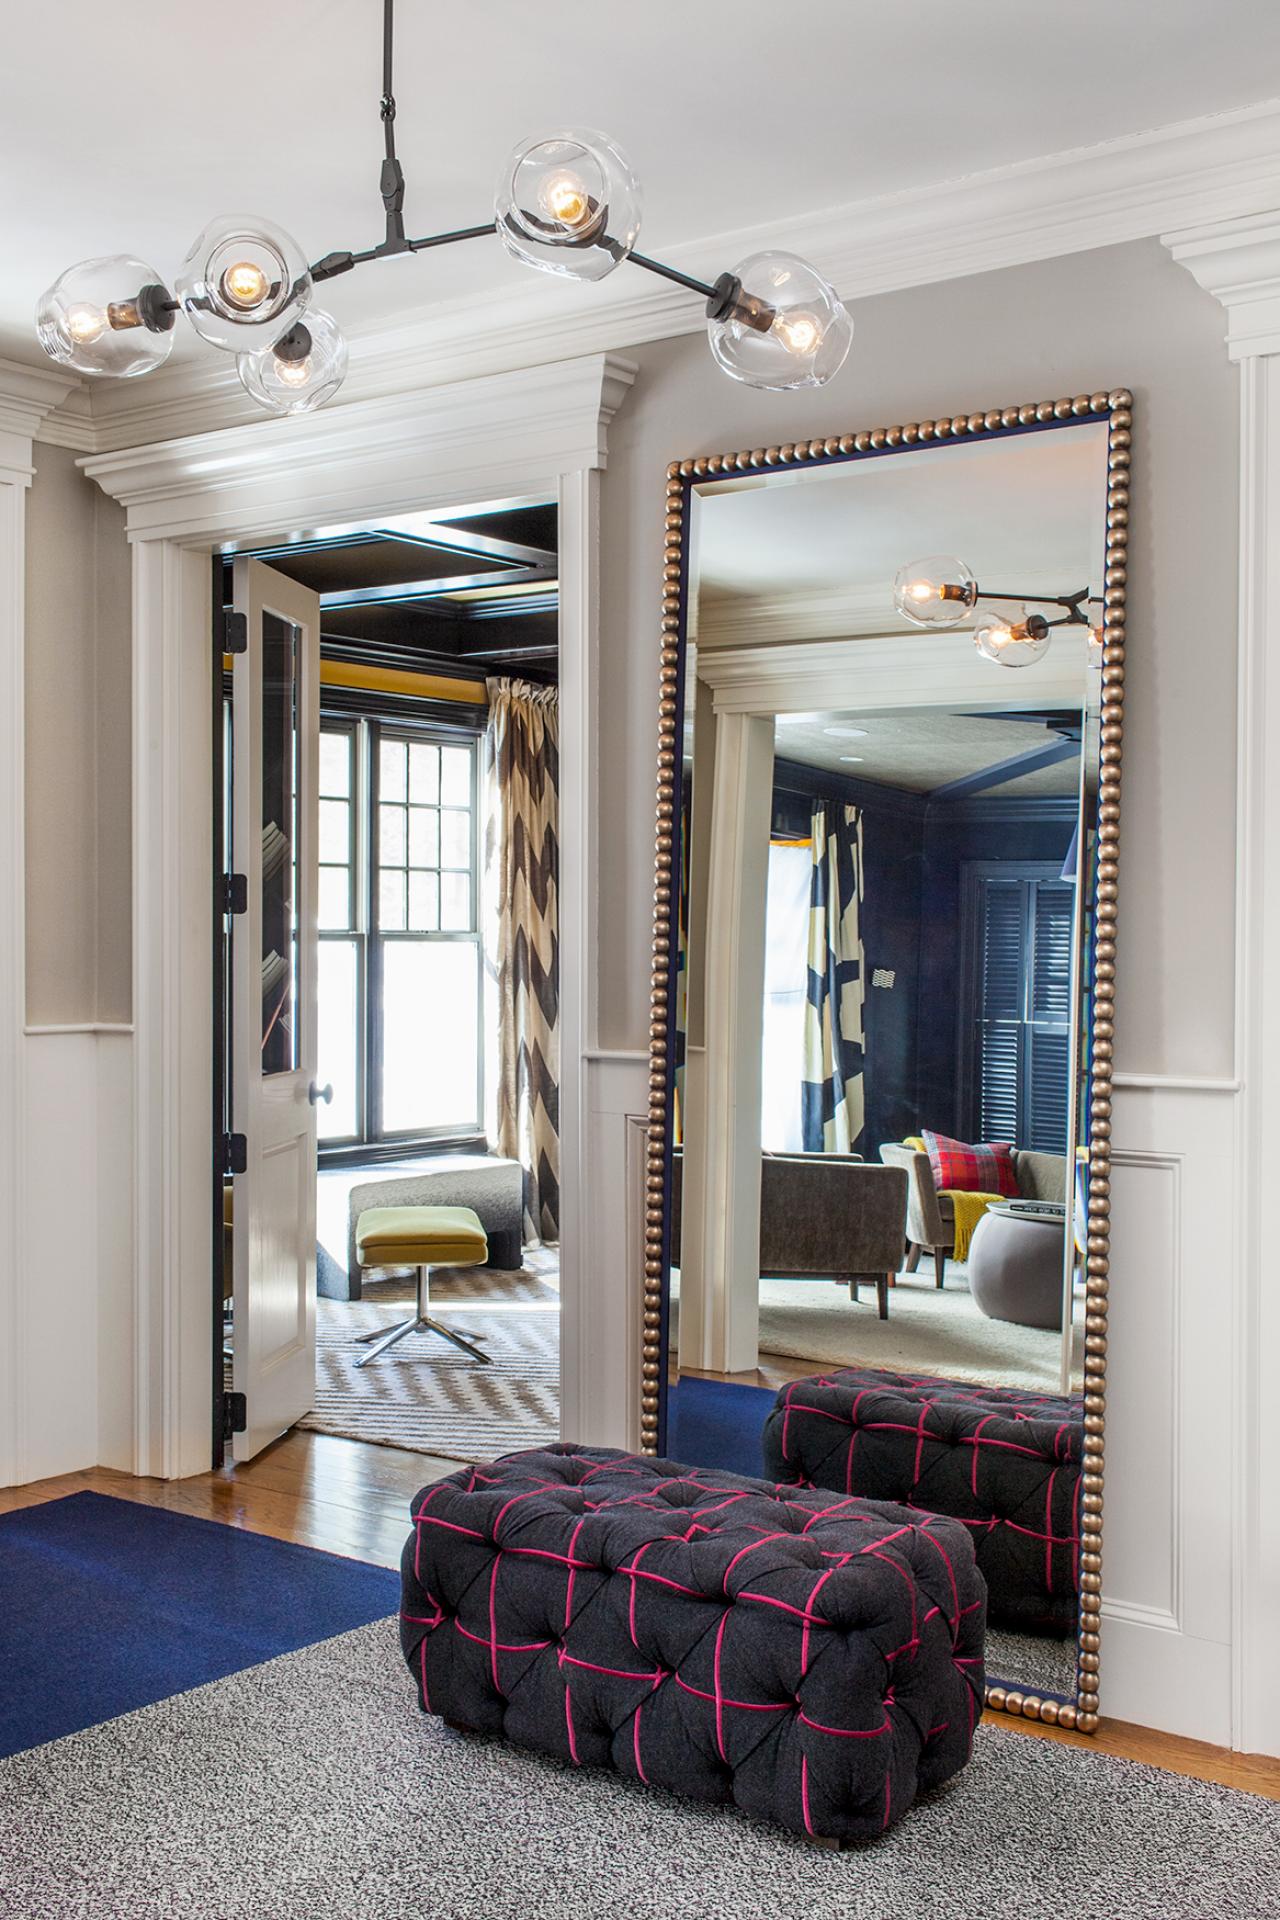 Design Tips For Making A Small Space, Large Foyer Mirror